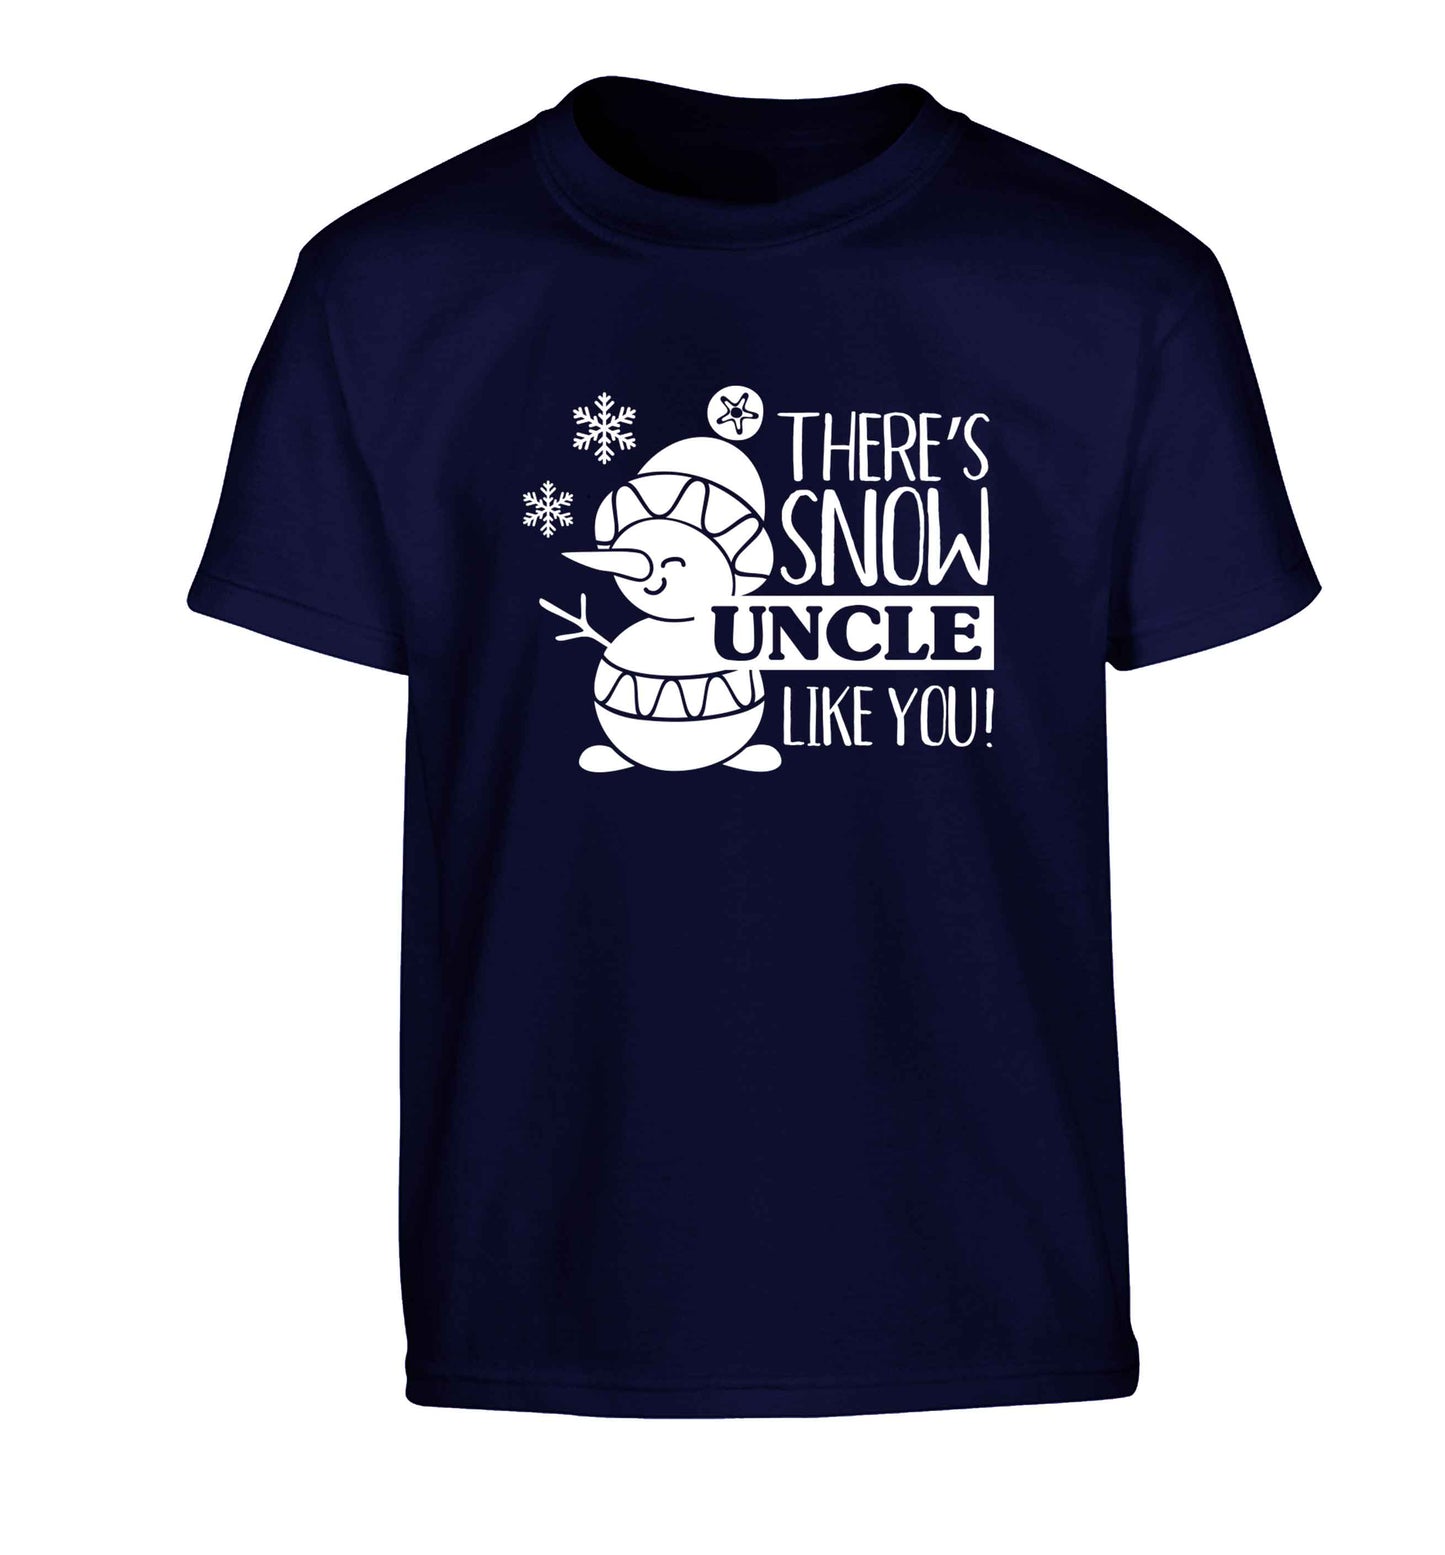 There's snow uncle like you Children's navy Tshirt 12-13 Years